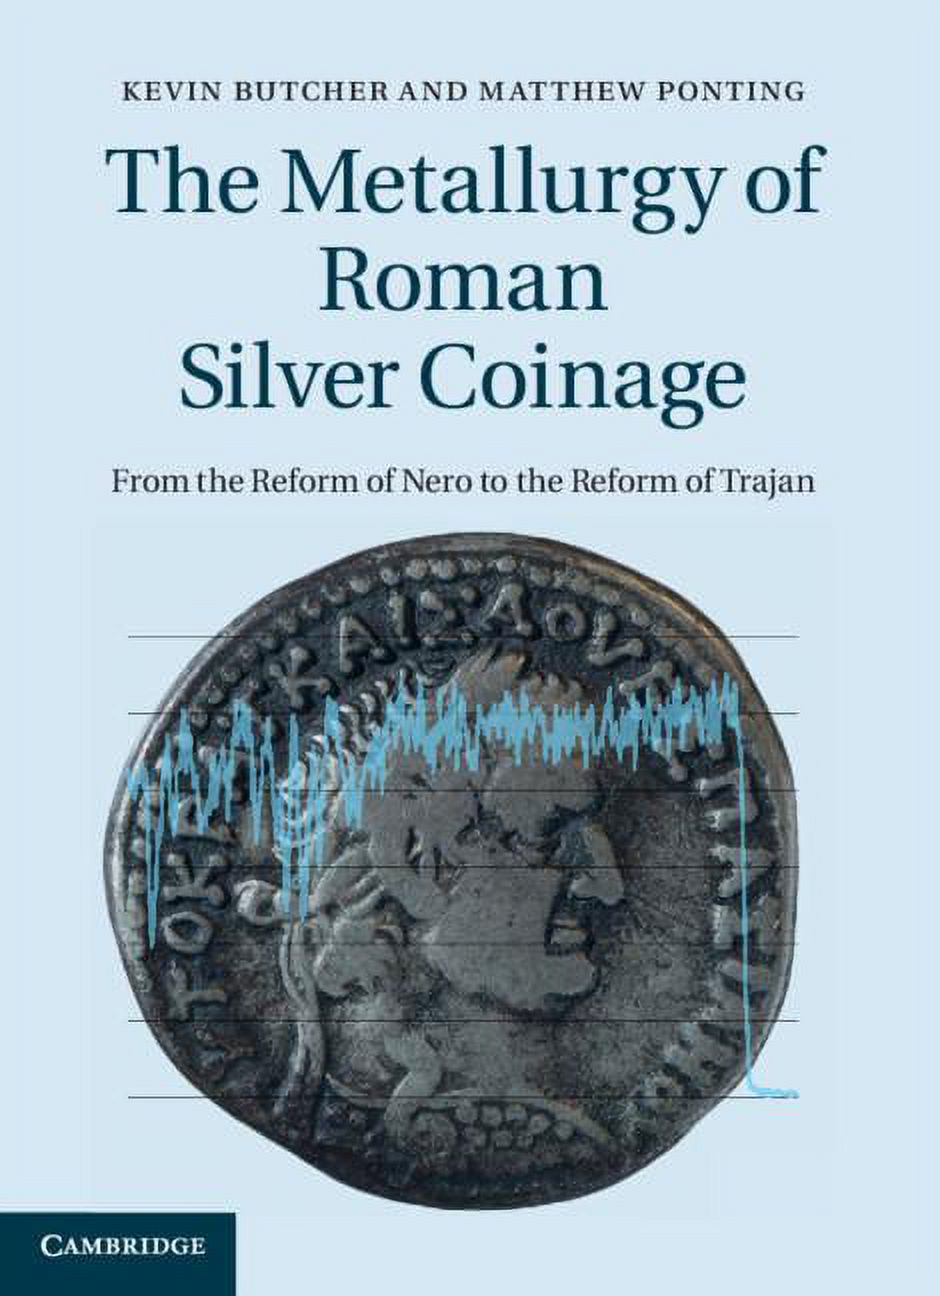 The Metallurgy of Roman Silver Coinage (Hardcover) - image 1 of 1